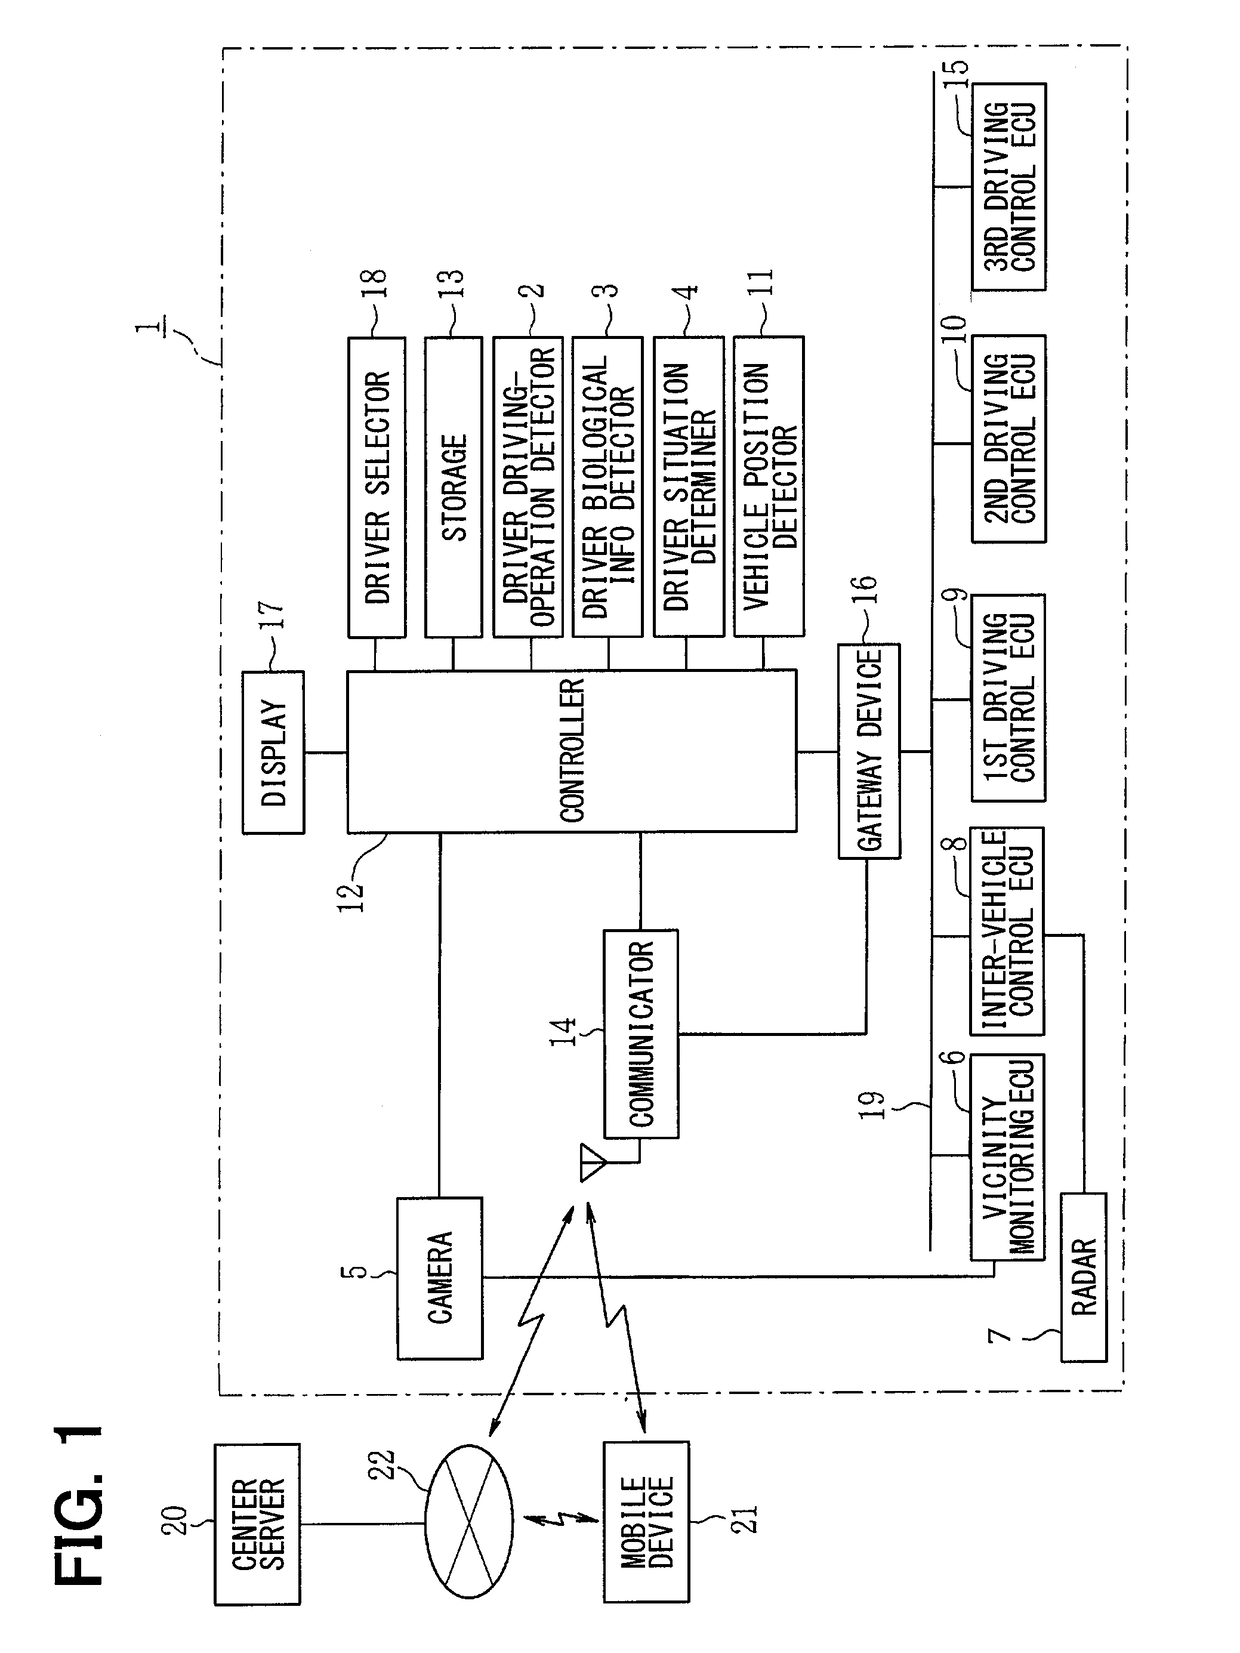 Vehicular driving control system